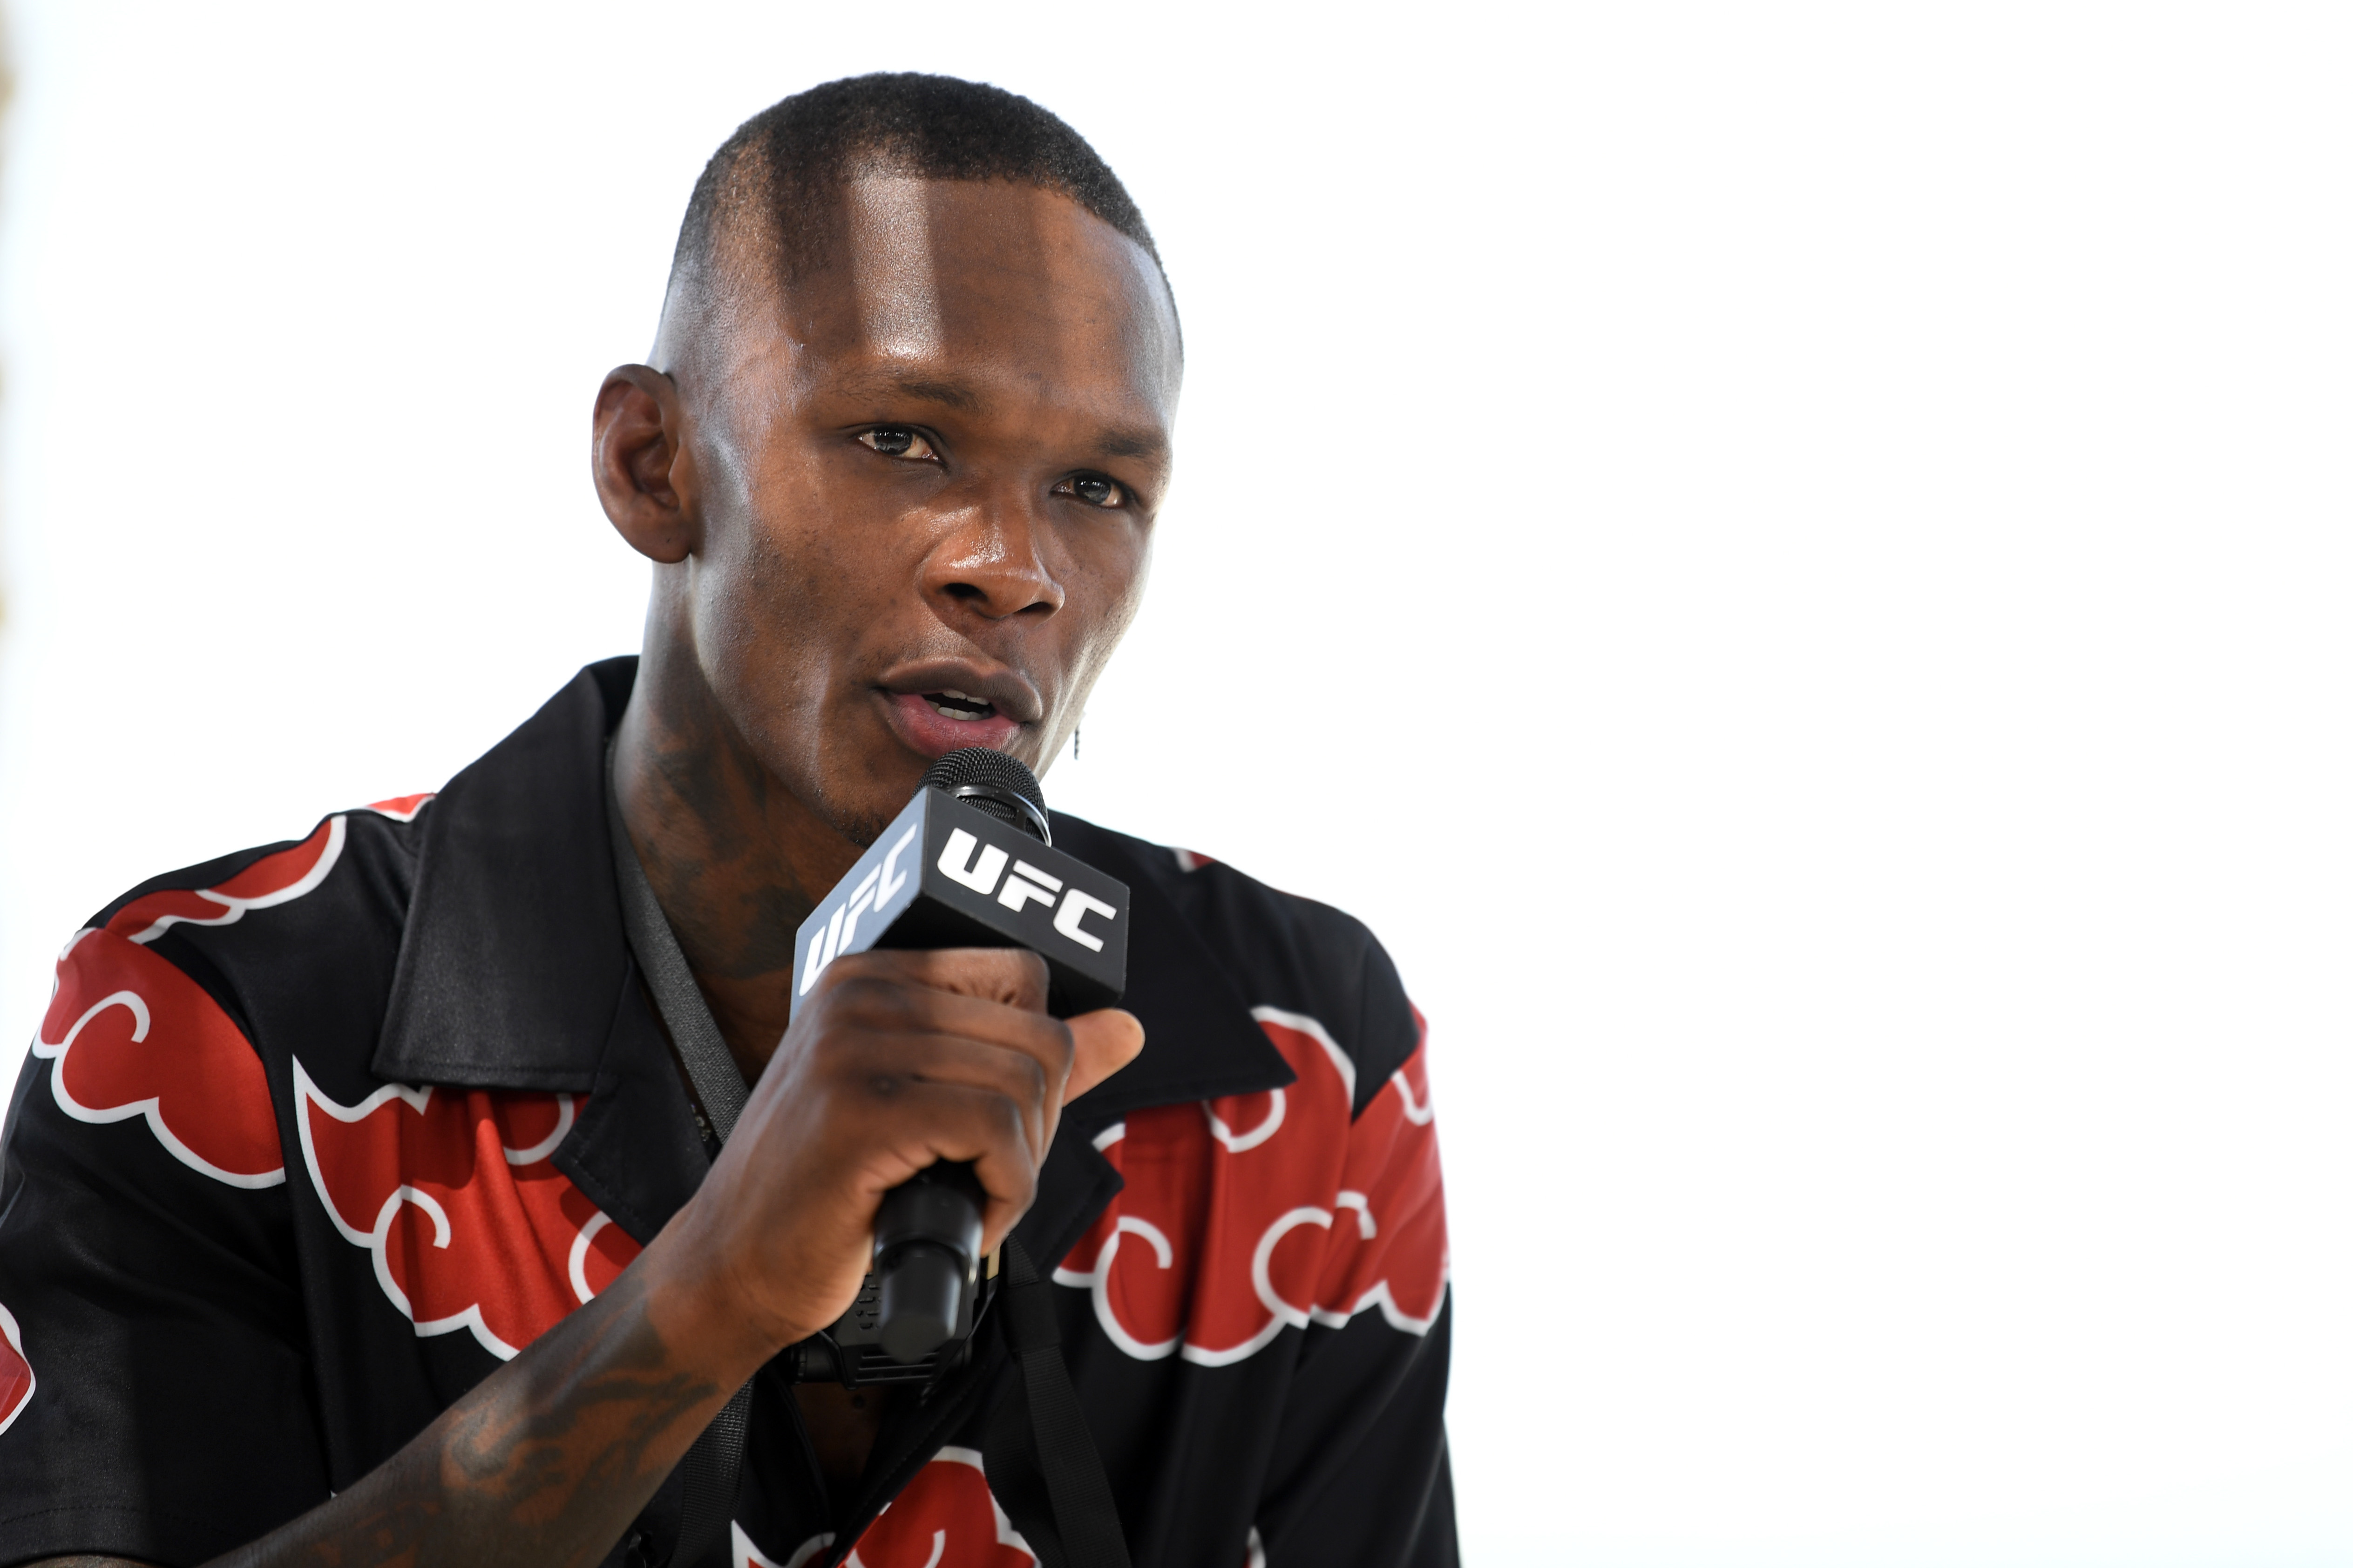 Anime Geek and UFC Star Israel Adesanya ‘Draws Strength From Characters That Aren’t Even Real’